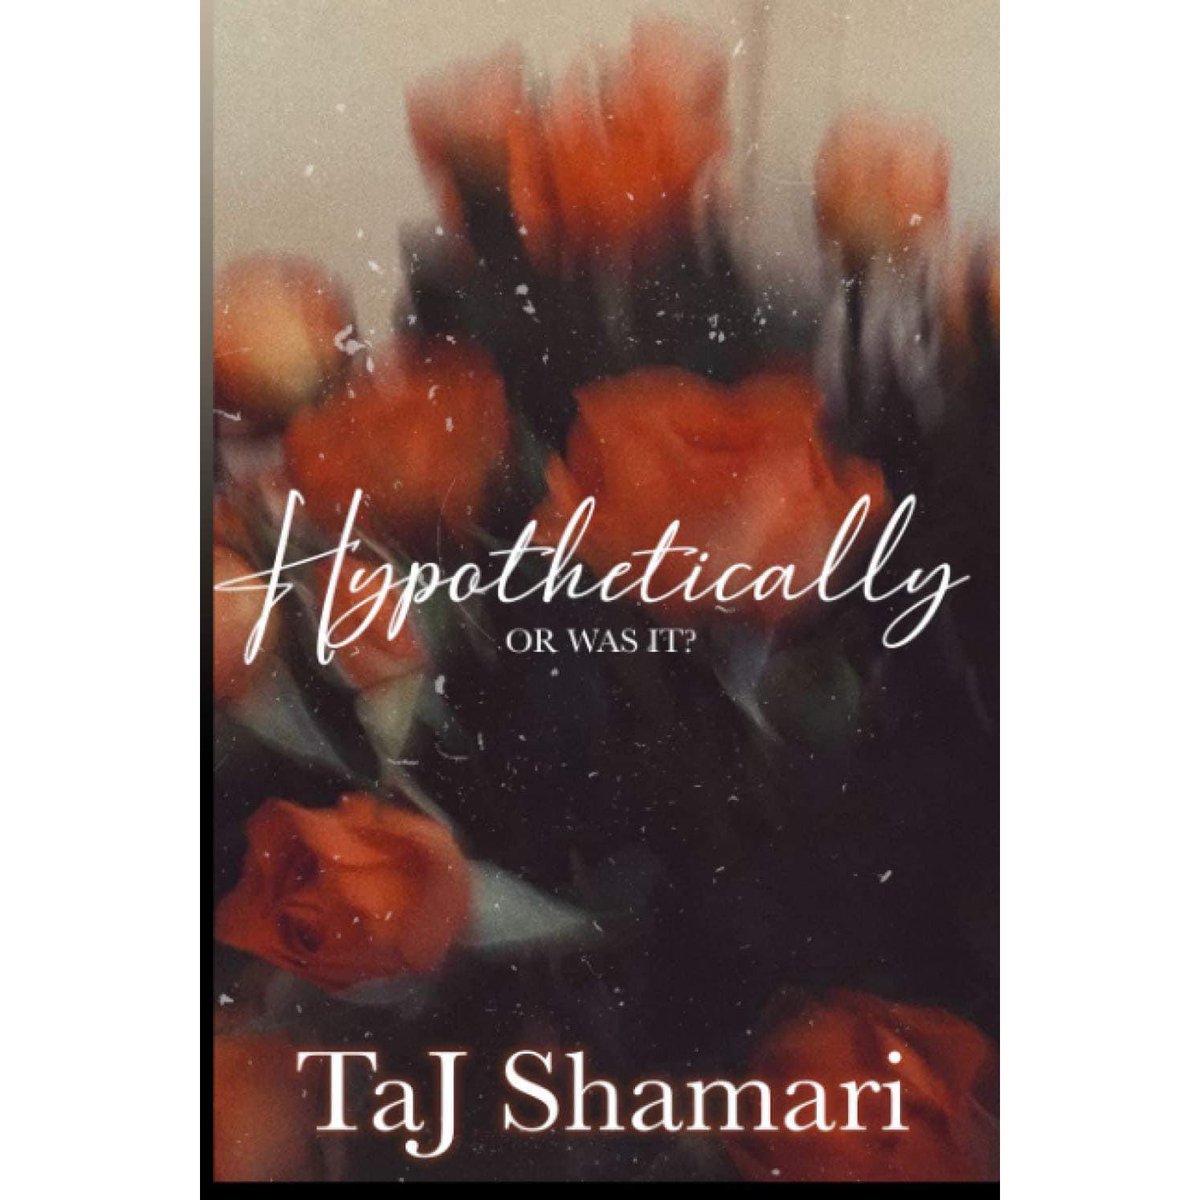 Check out this short playlist to get you ready to read about Tommie and Solana‼️
Link in bio!

#URBANFICTION   #AfricanAmericanFiction #ShamelessSelfpromoFriday #romance #writerslift #urbanromance #blackromance #goodreads #kindleunlimited #romancereader #romancewriter